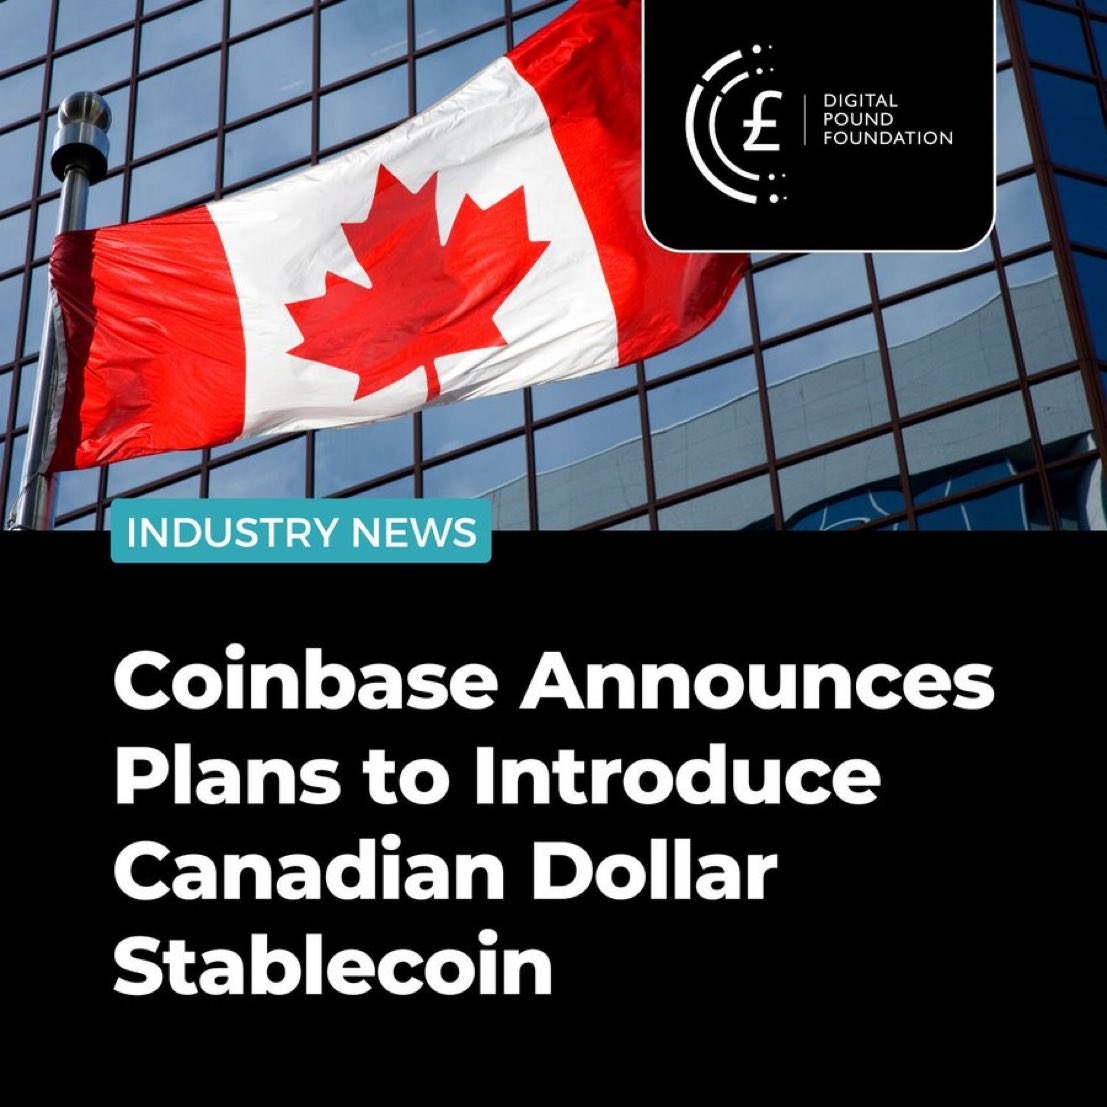 Following their recent acquisition of a license to operate in #Canada, the #cryptocurrency exchange @Coinbase has announced plans to support a #stablecoin pegged to the #Canadian #dollar 👉 buff.ly/3weKEkv ... #DigitalCurrencies #Cryptocurrency #Fintech #Coinbase